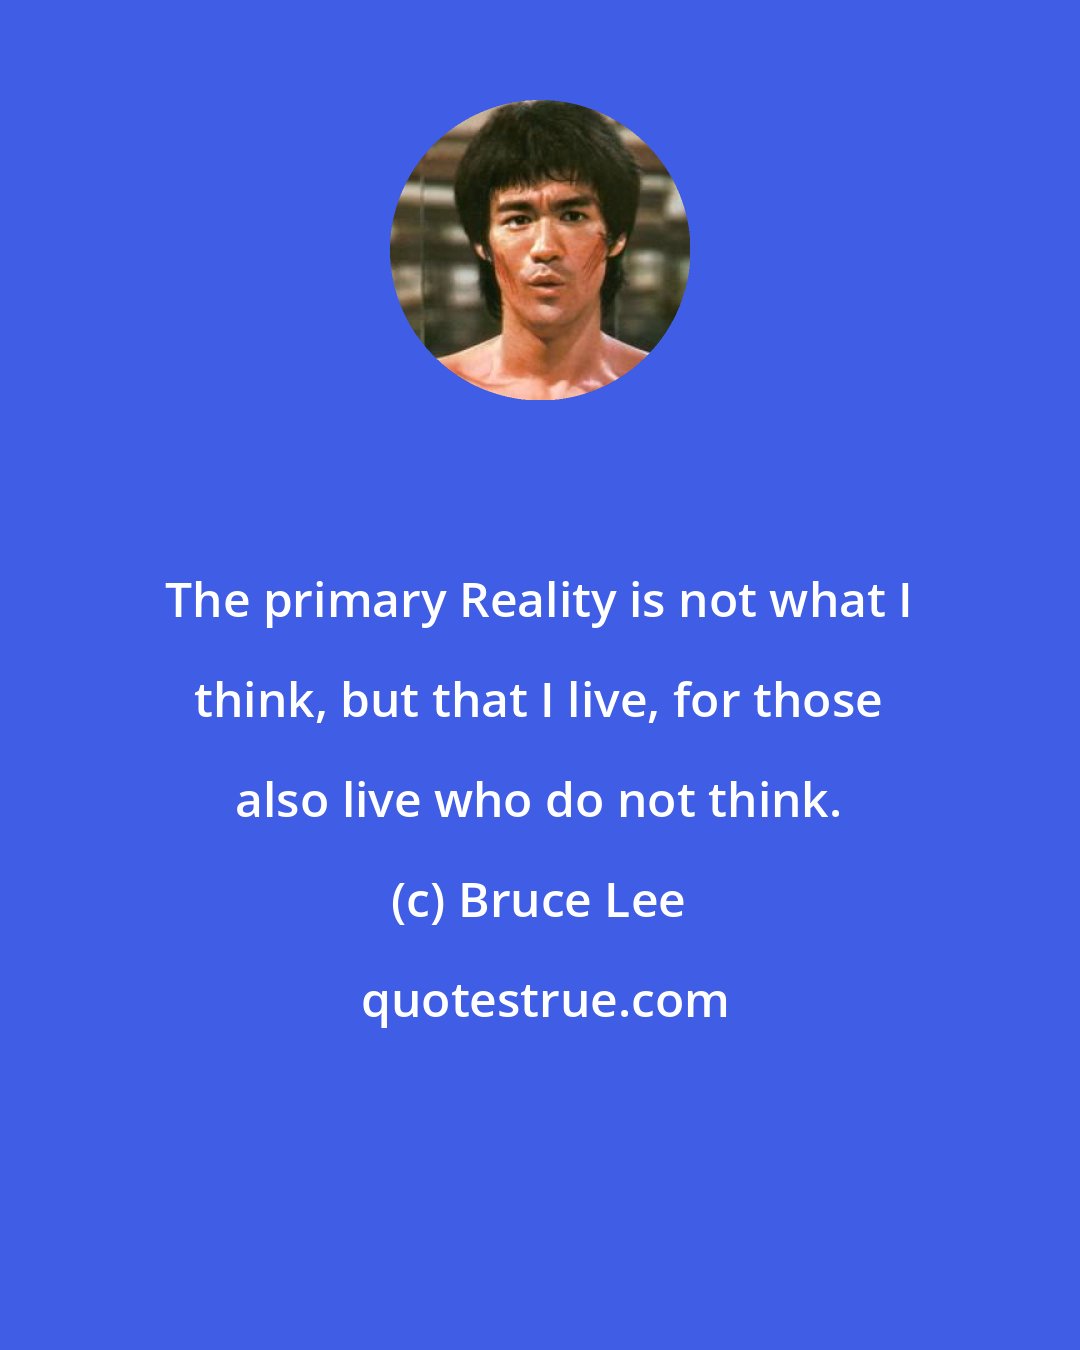 Bruce Lee: The primary Reality is not what I think, but that I live, for those also live who do not think.